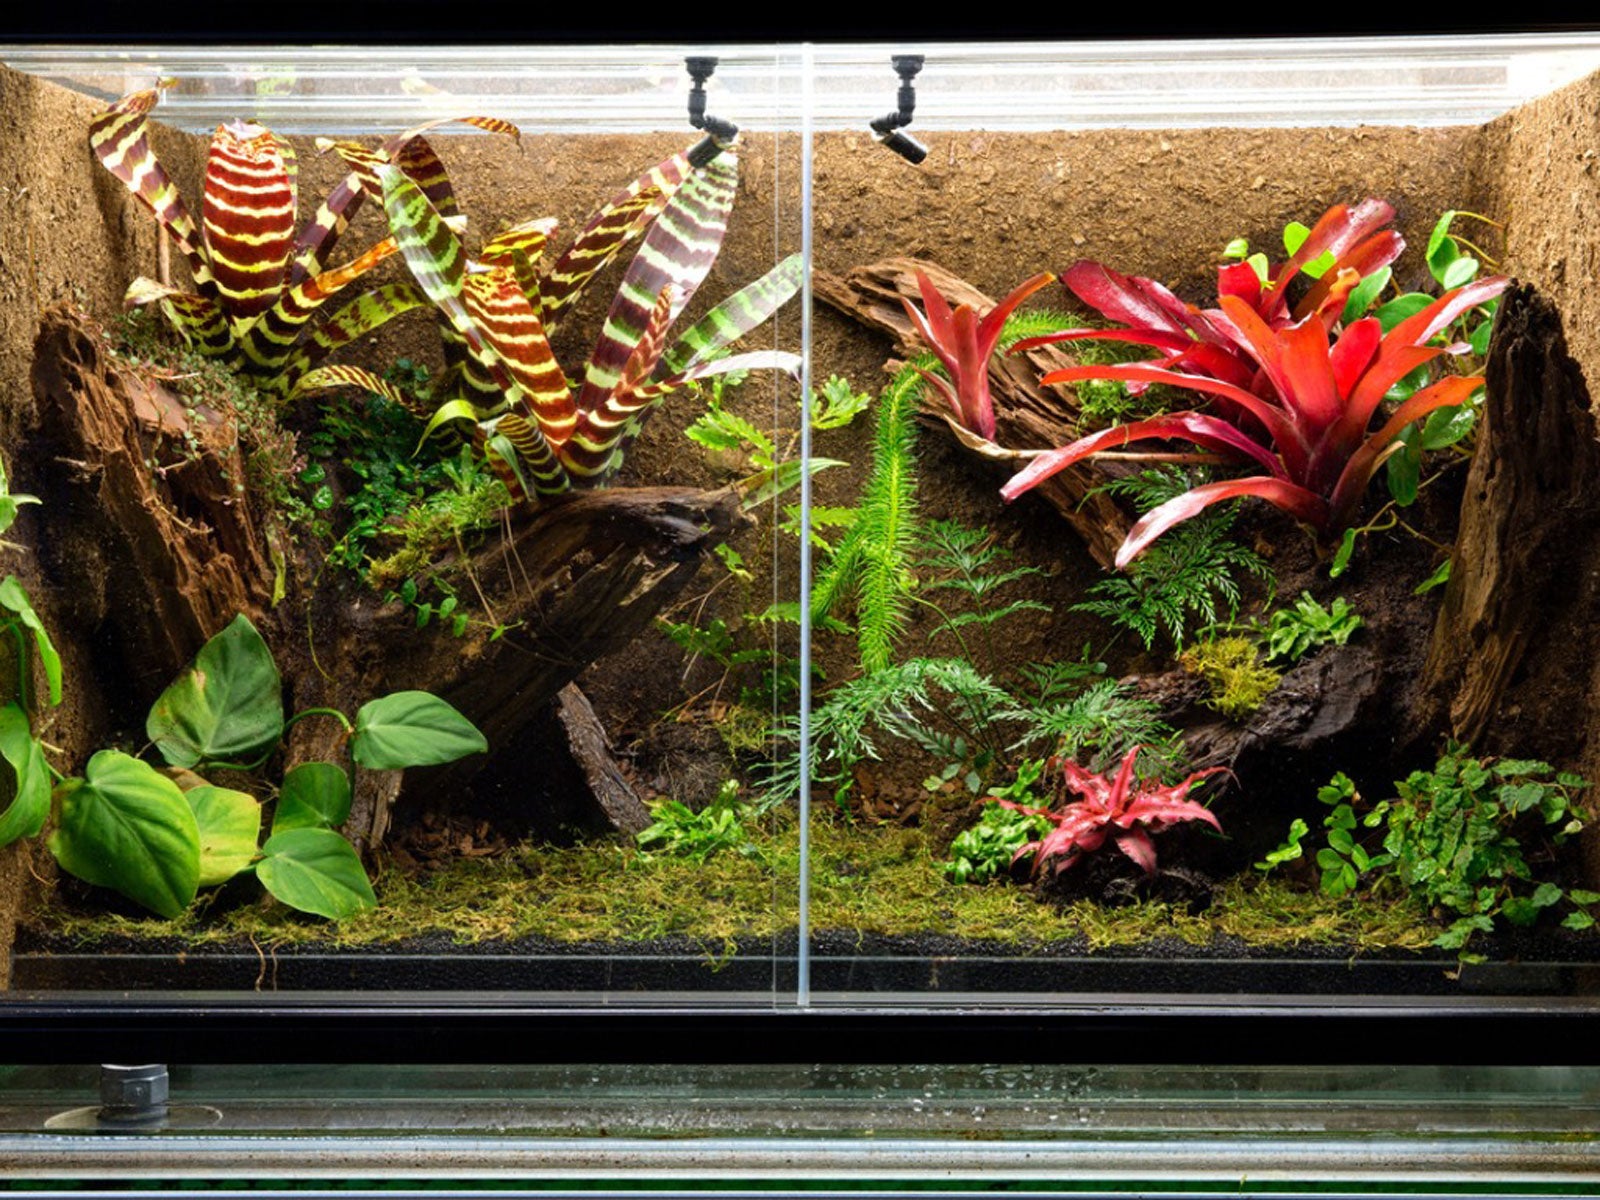 Reptiles And Houseplants: Growing Plants For A Terrarium With